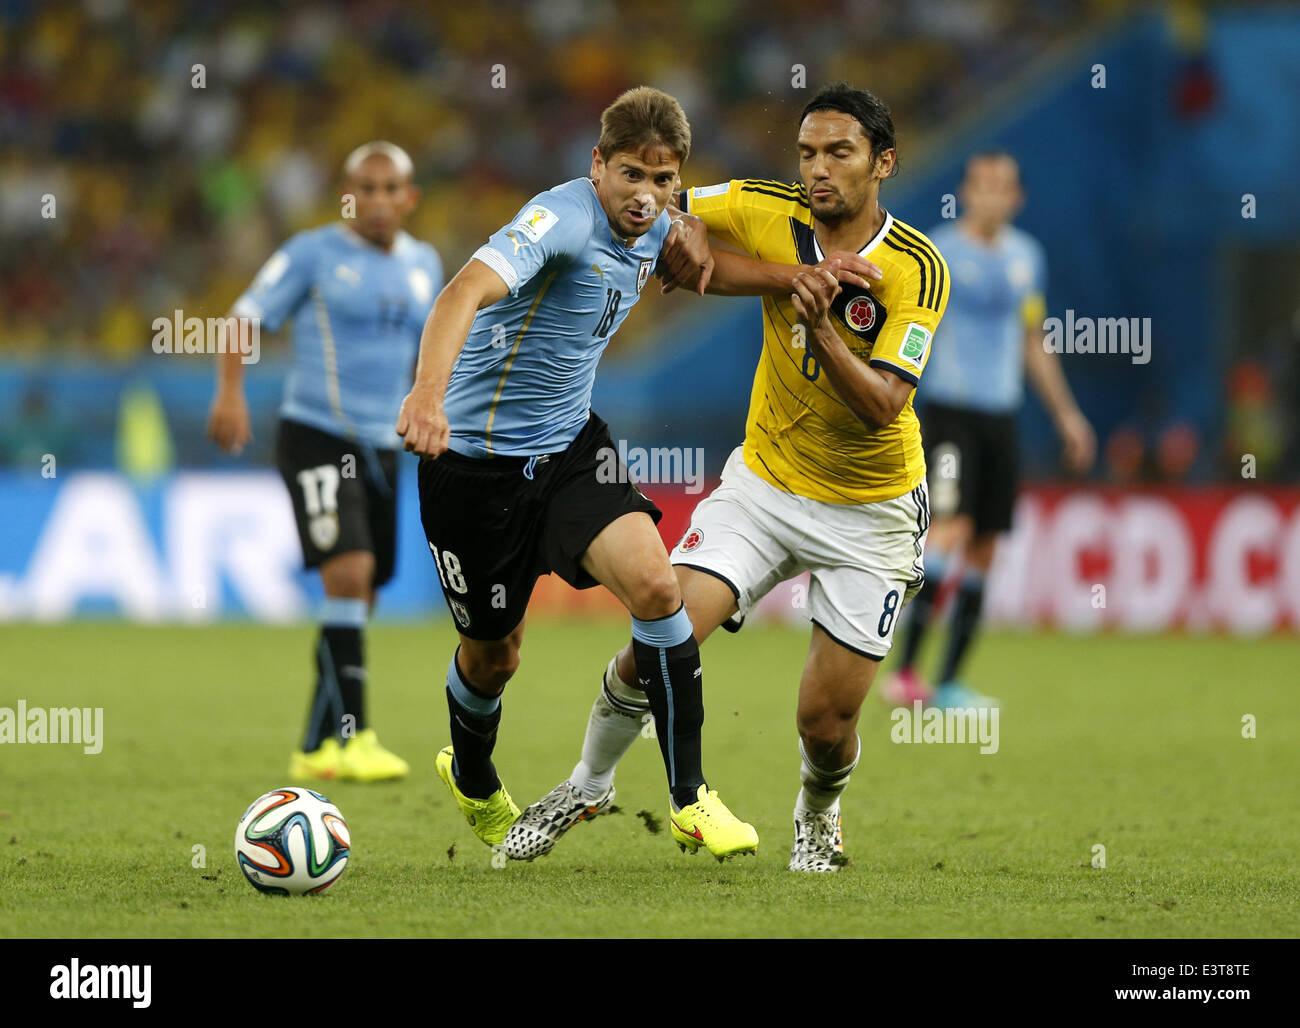 Rio De Janeiro, Brazil. 28th June, 2014. Uruguay's Gaston Ramirez (L, front) vies with Colombia's Abel Aguilar during a Round of 16 match between Colombia and Uruguay of 2014 FIFA World Cup at the Estadio do Maracana Stadium in Rio de Janeiro, Brazil, on June 28, 2014. Credit:  Wang Lili/Xinhua/Alamy Live News Stock Photo